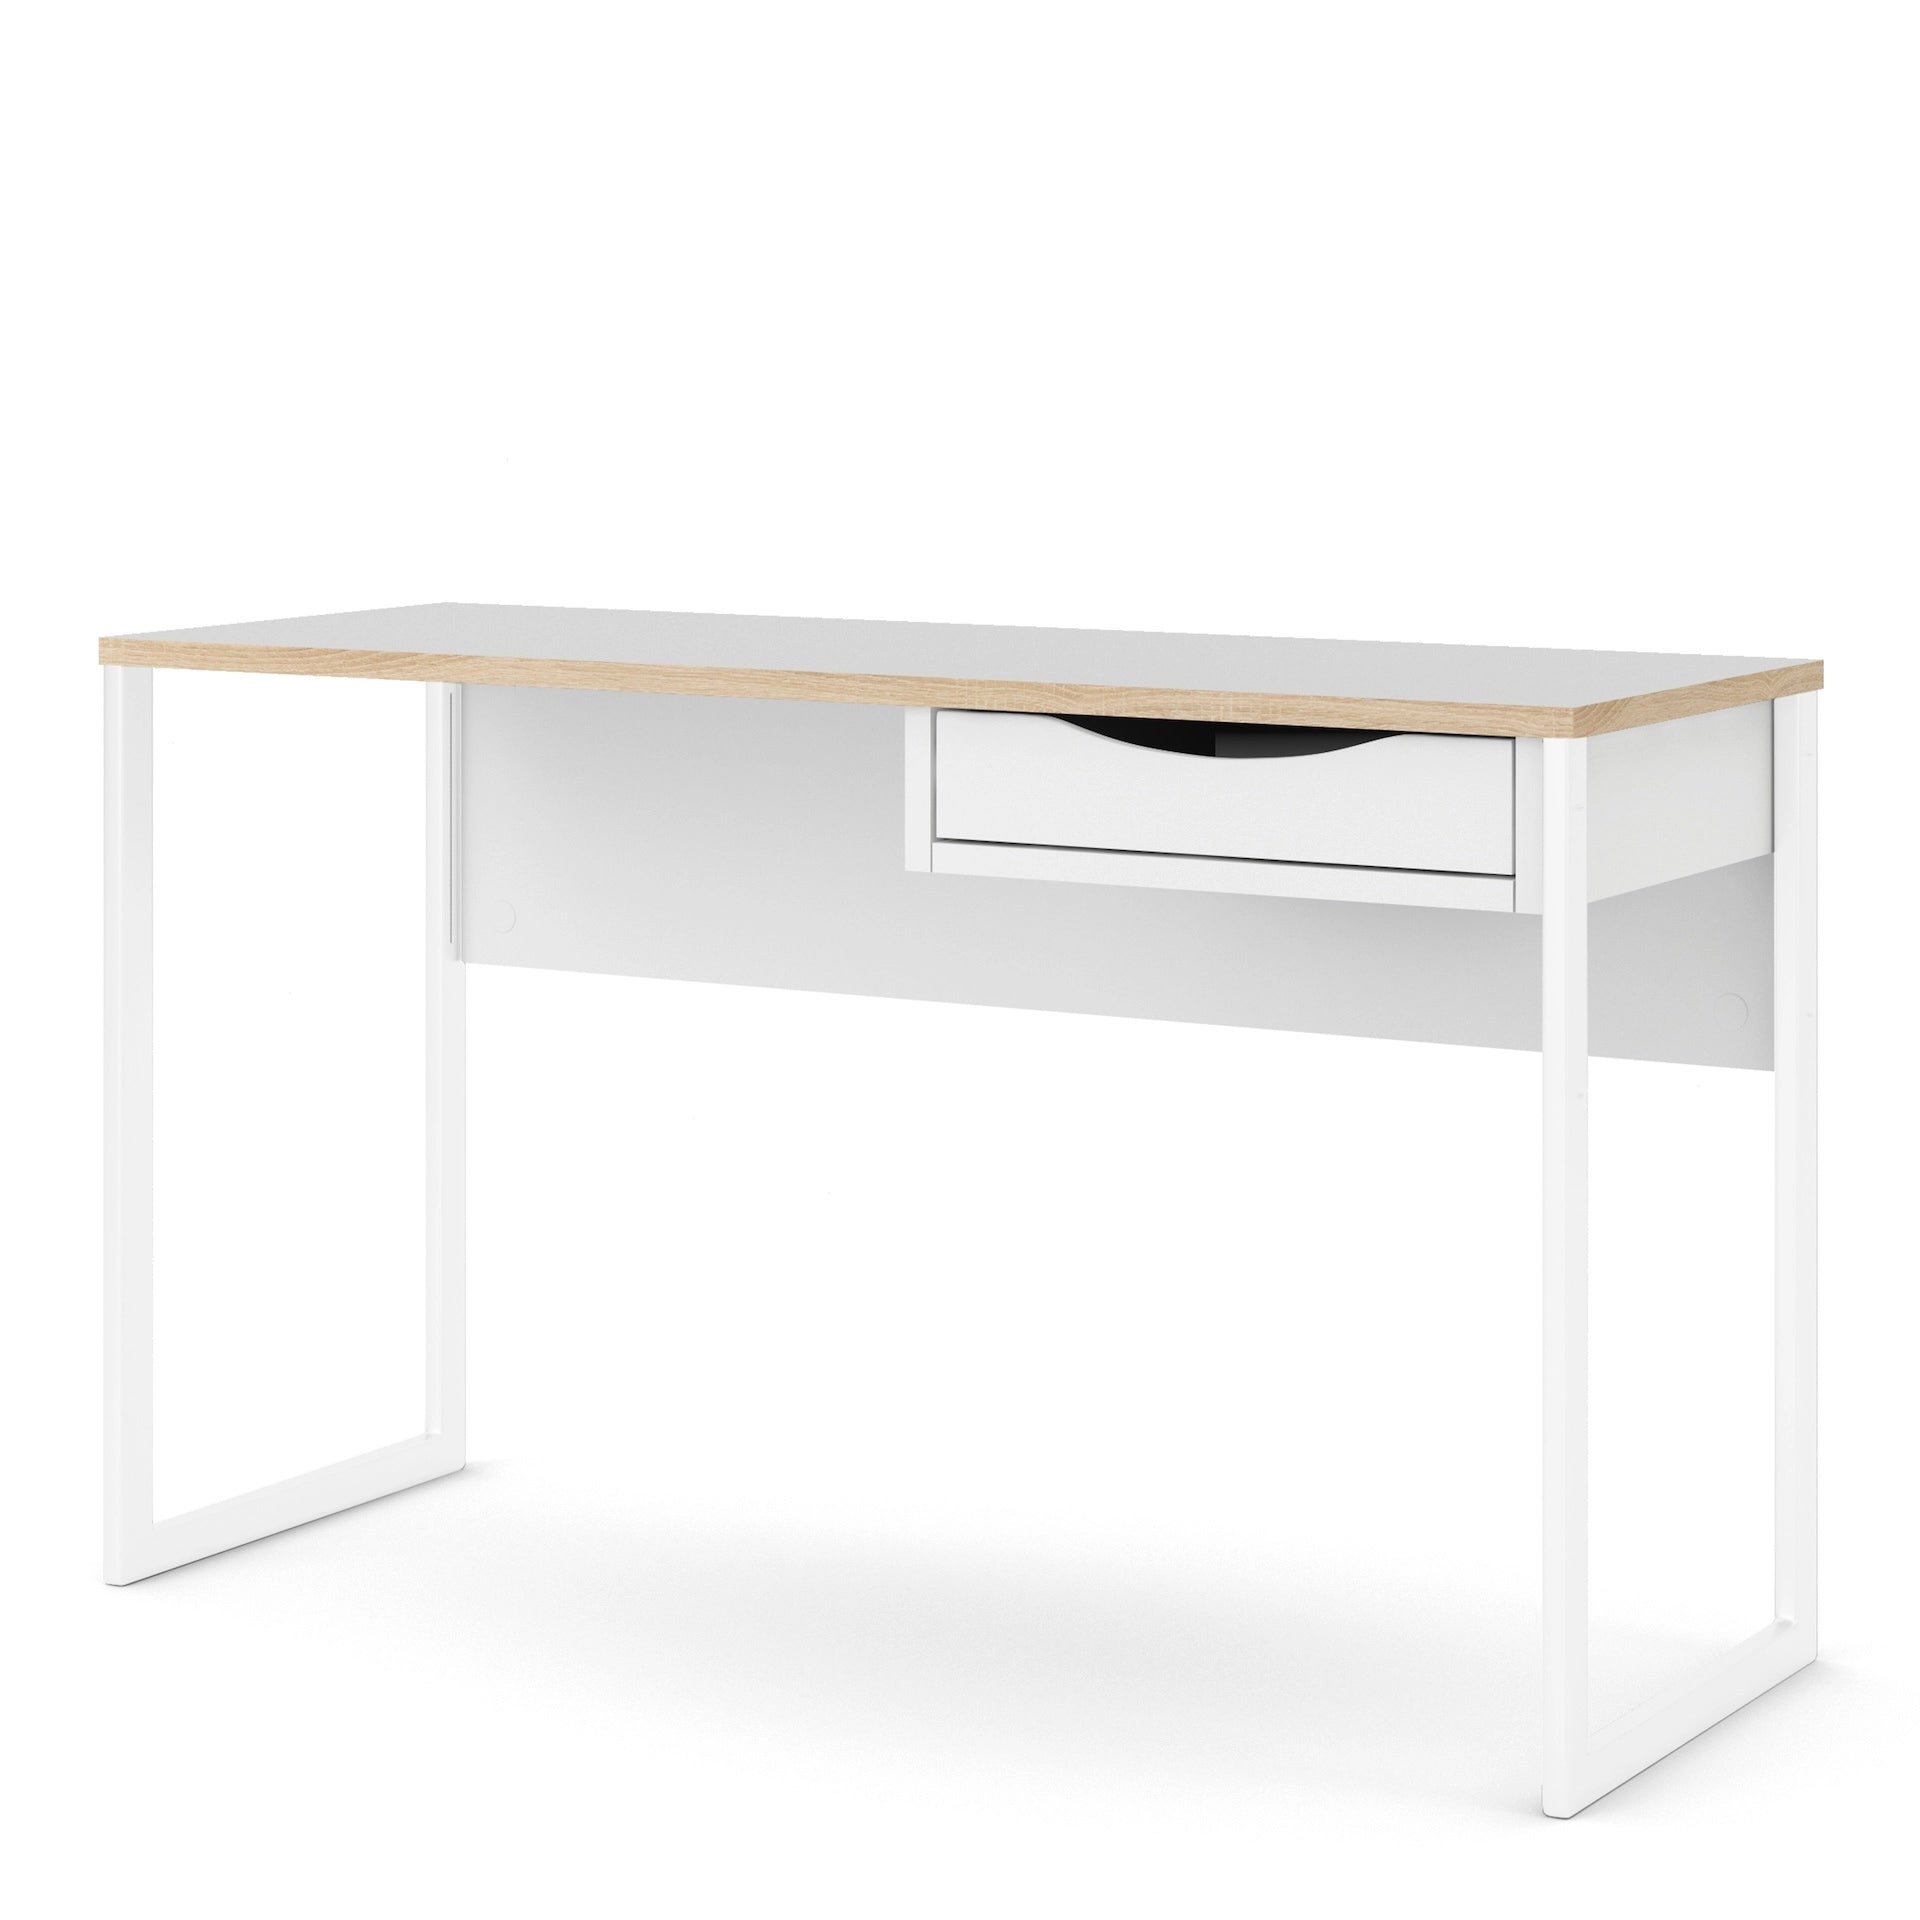 Furniture To Go Function Plus Desk 1 Drawer Wide in White with Oak Trim